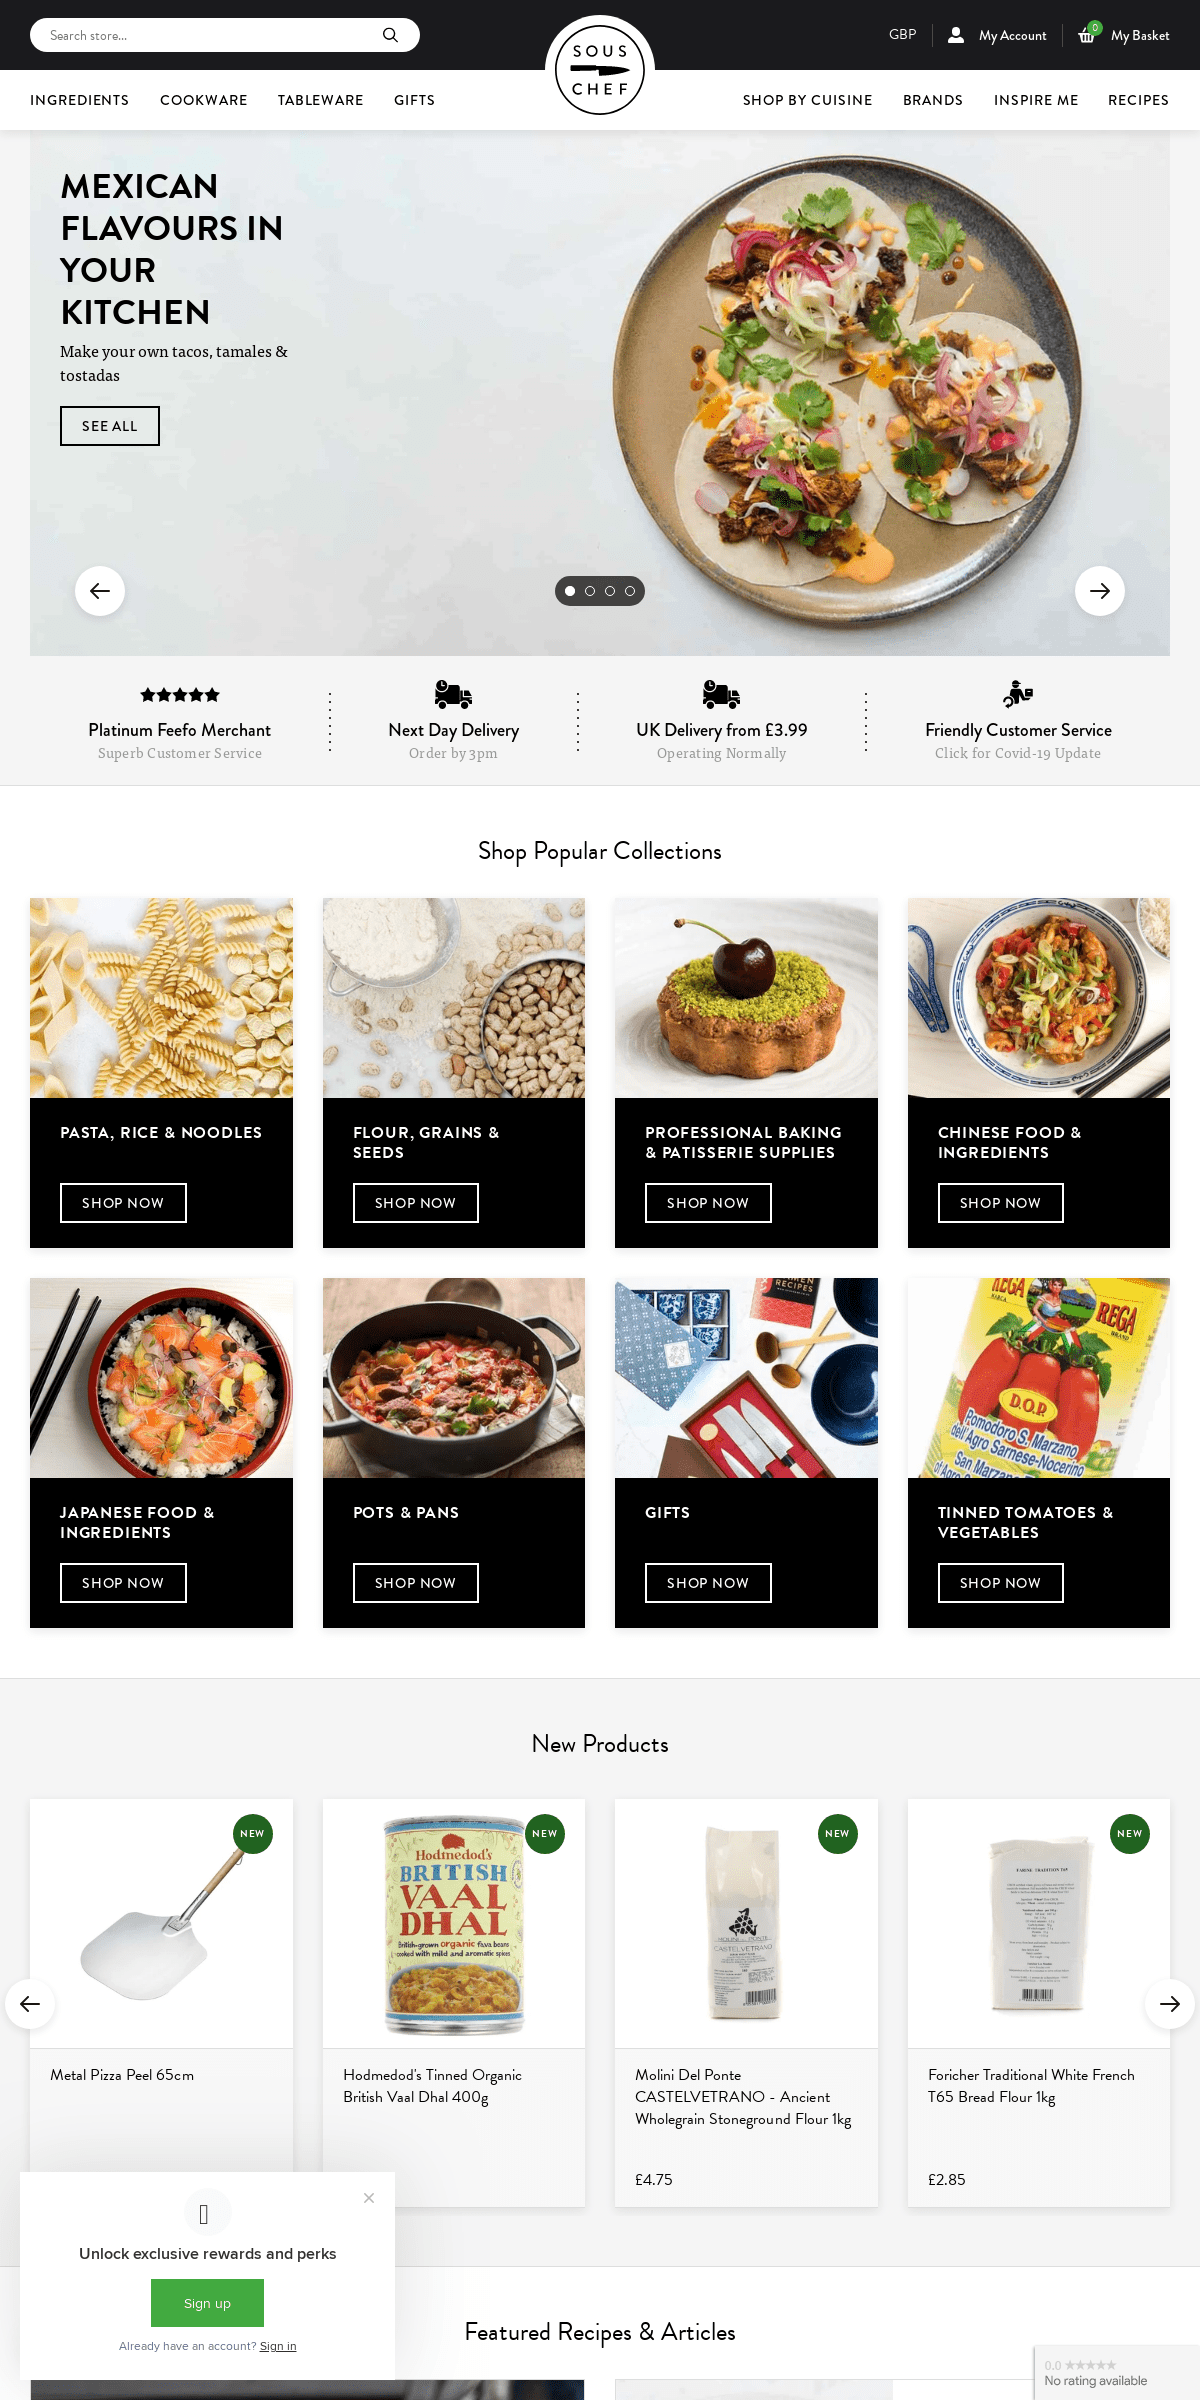 A complete backup of souschef.co.uk